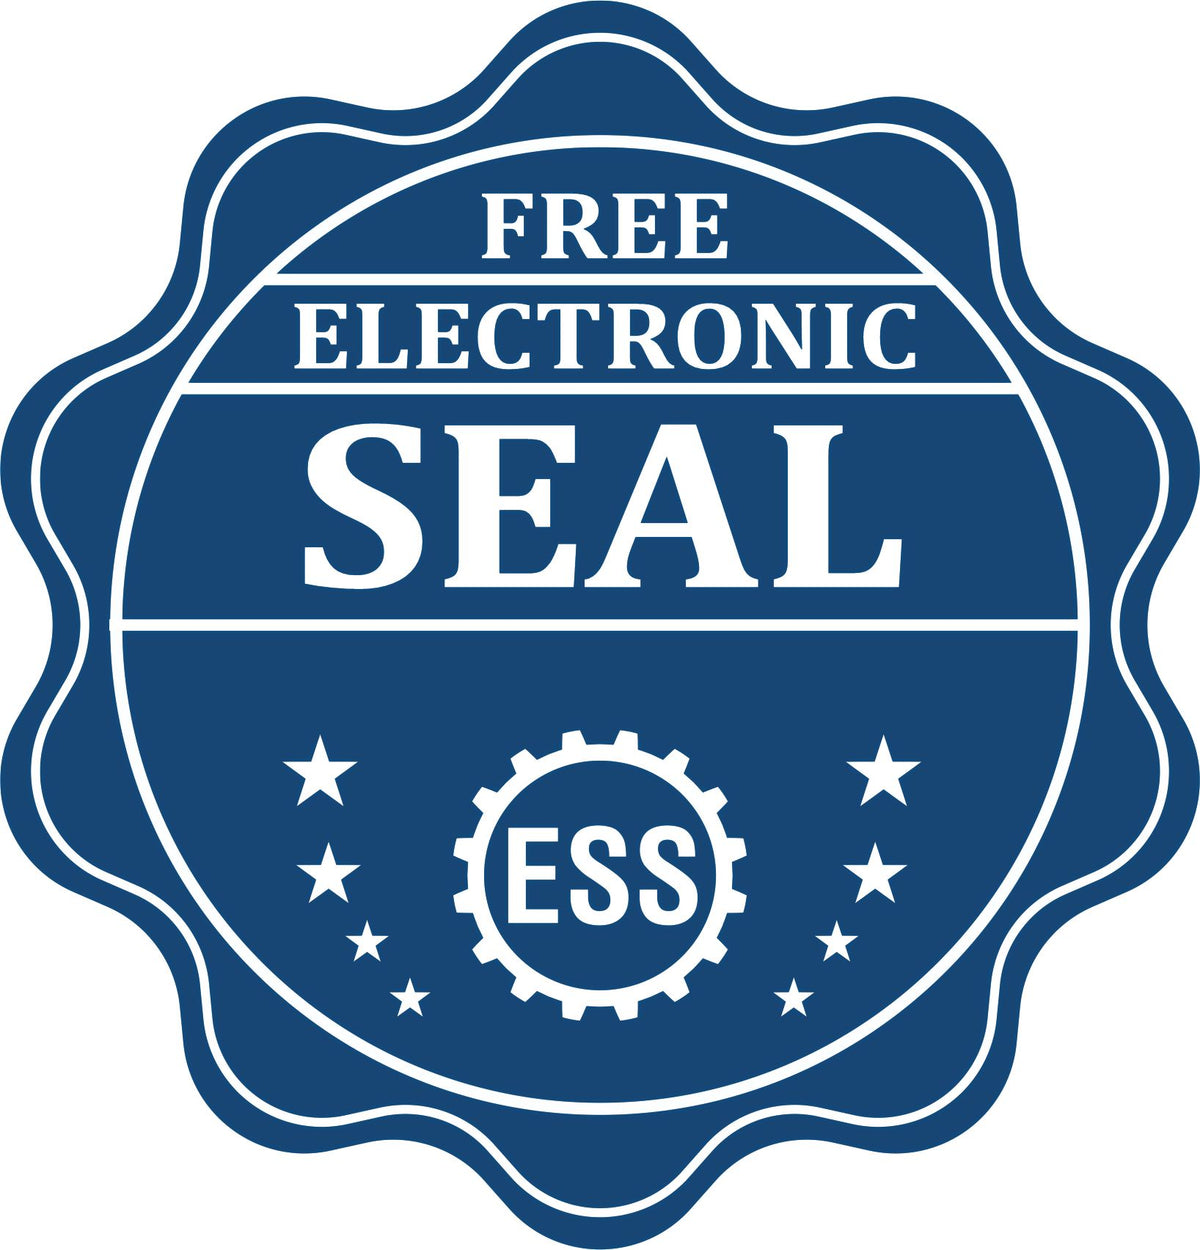 A badge showing a free electronic seal for the Slim Pre-Inked State Seal Notary Stamp for New Jersey with stars and the ESS gear on the emblem.